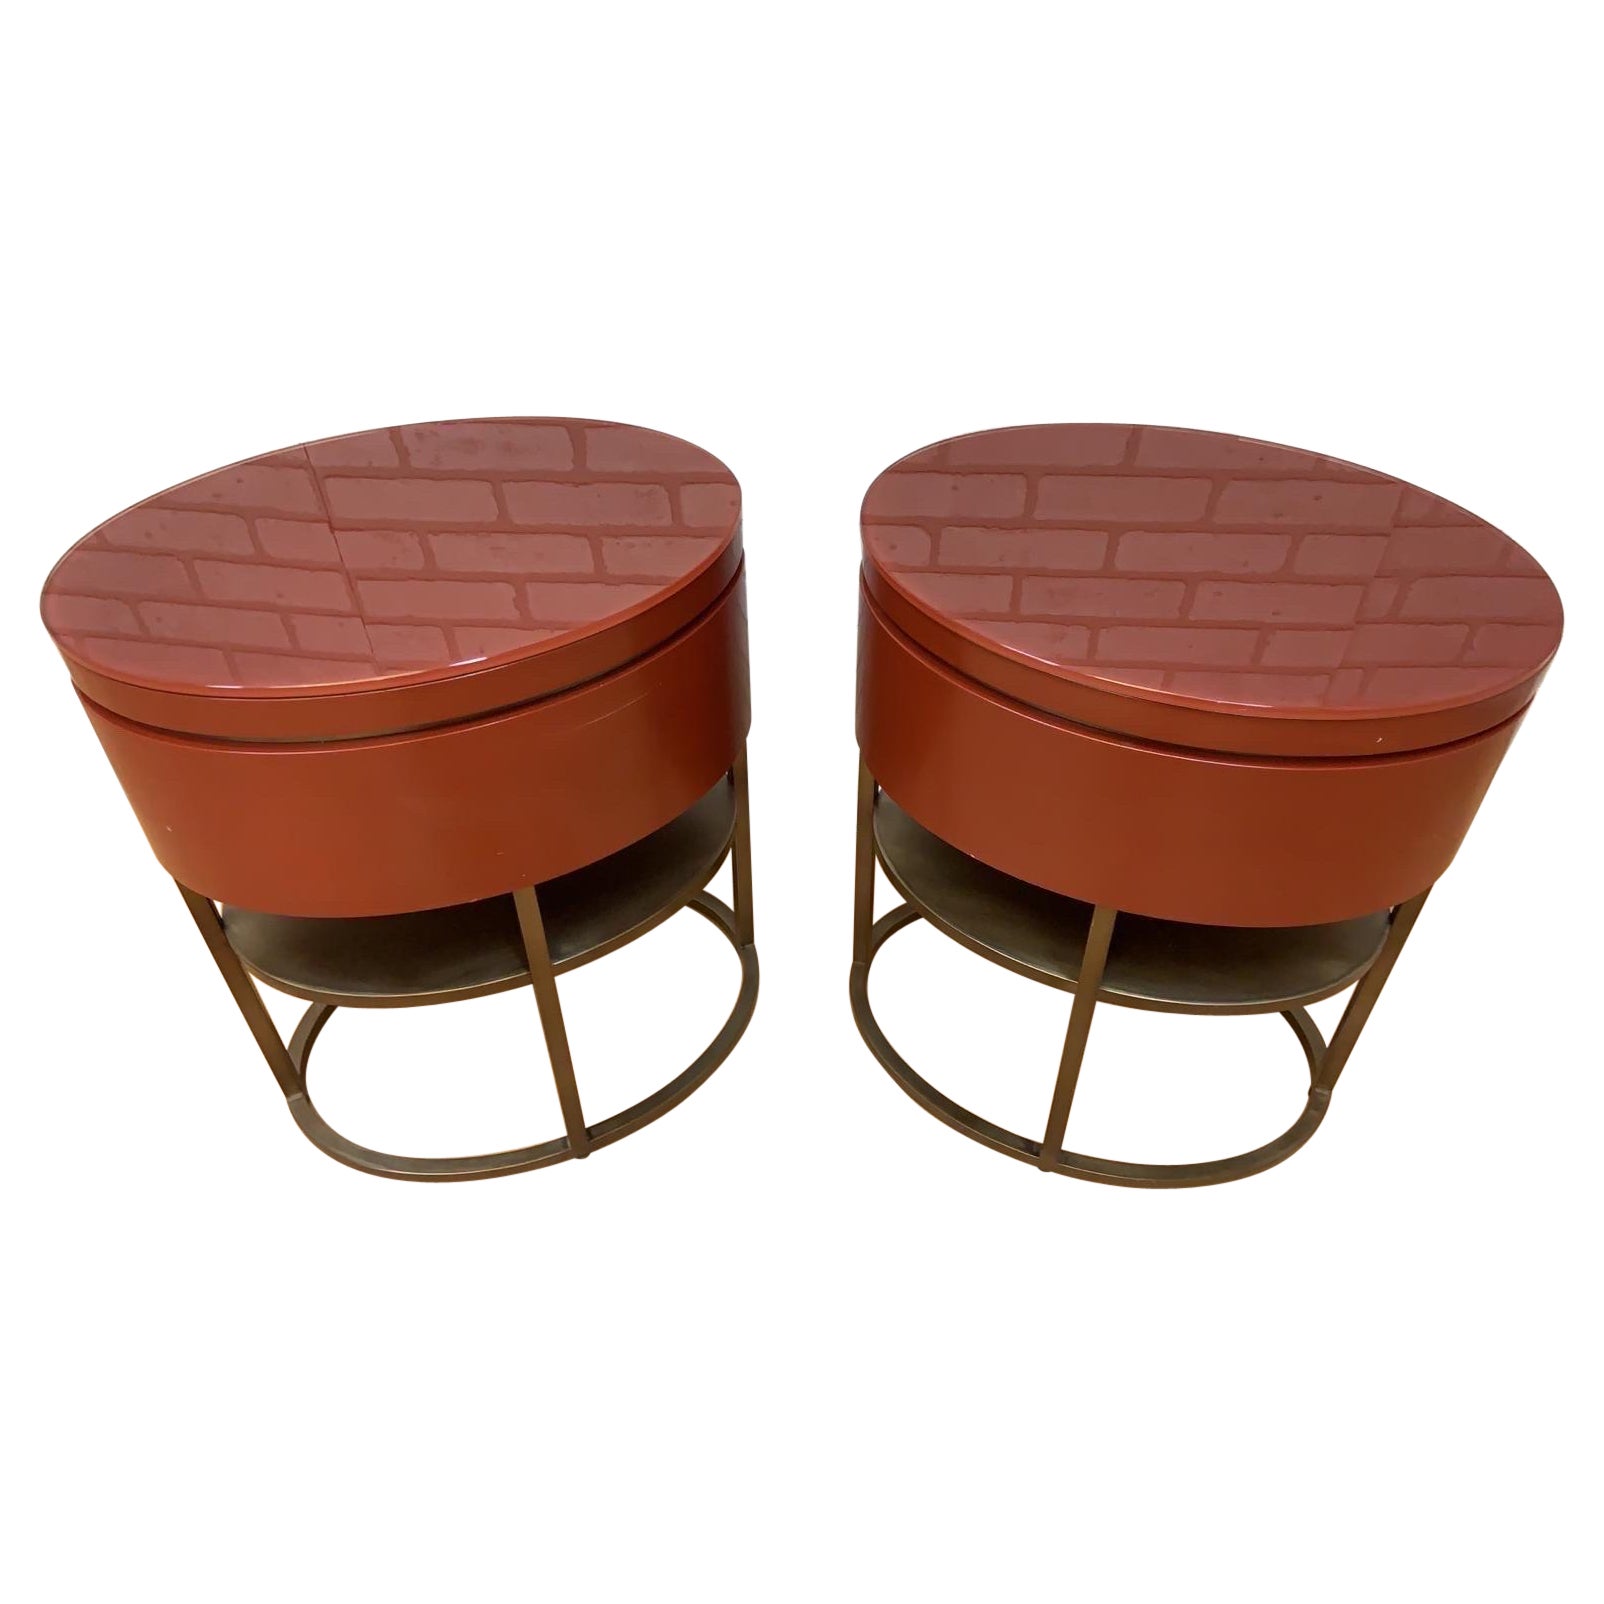 Vintage Contemporary Custom Designed Oval Side Table/Night-Stands - Pair For Sale